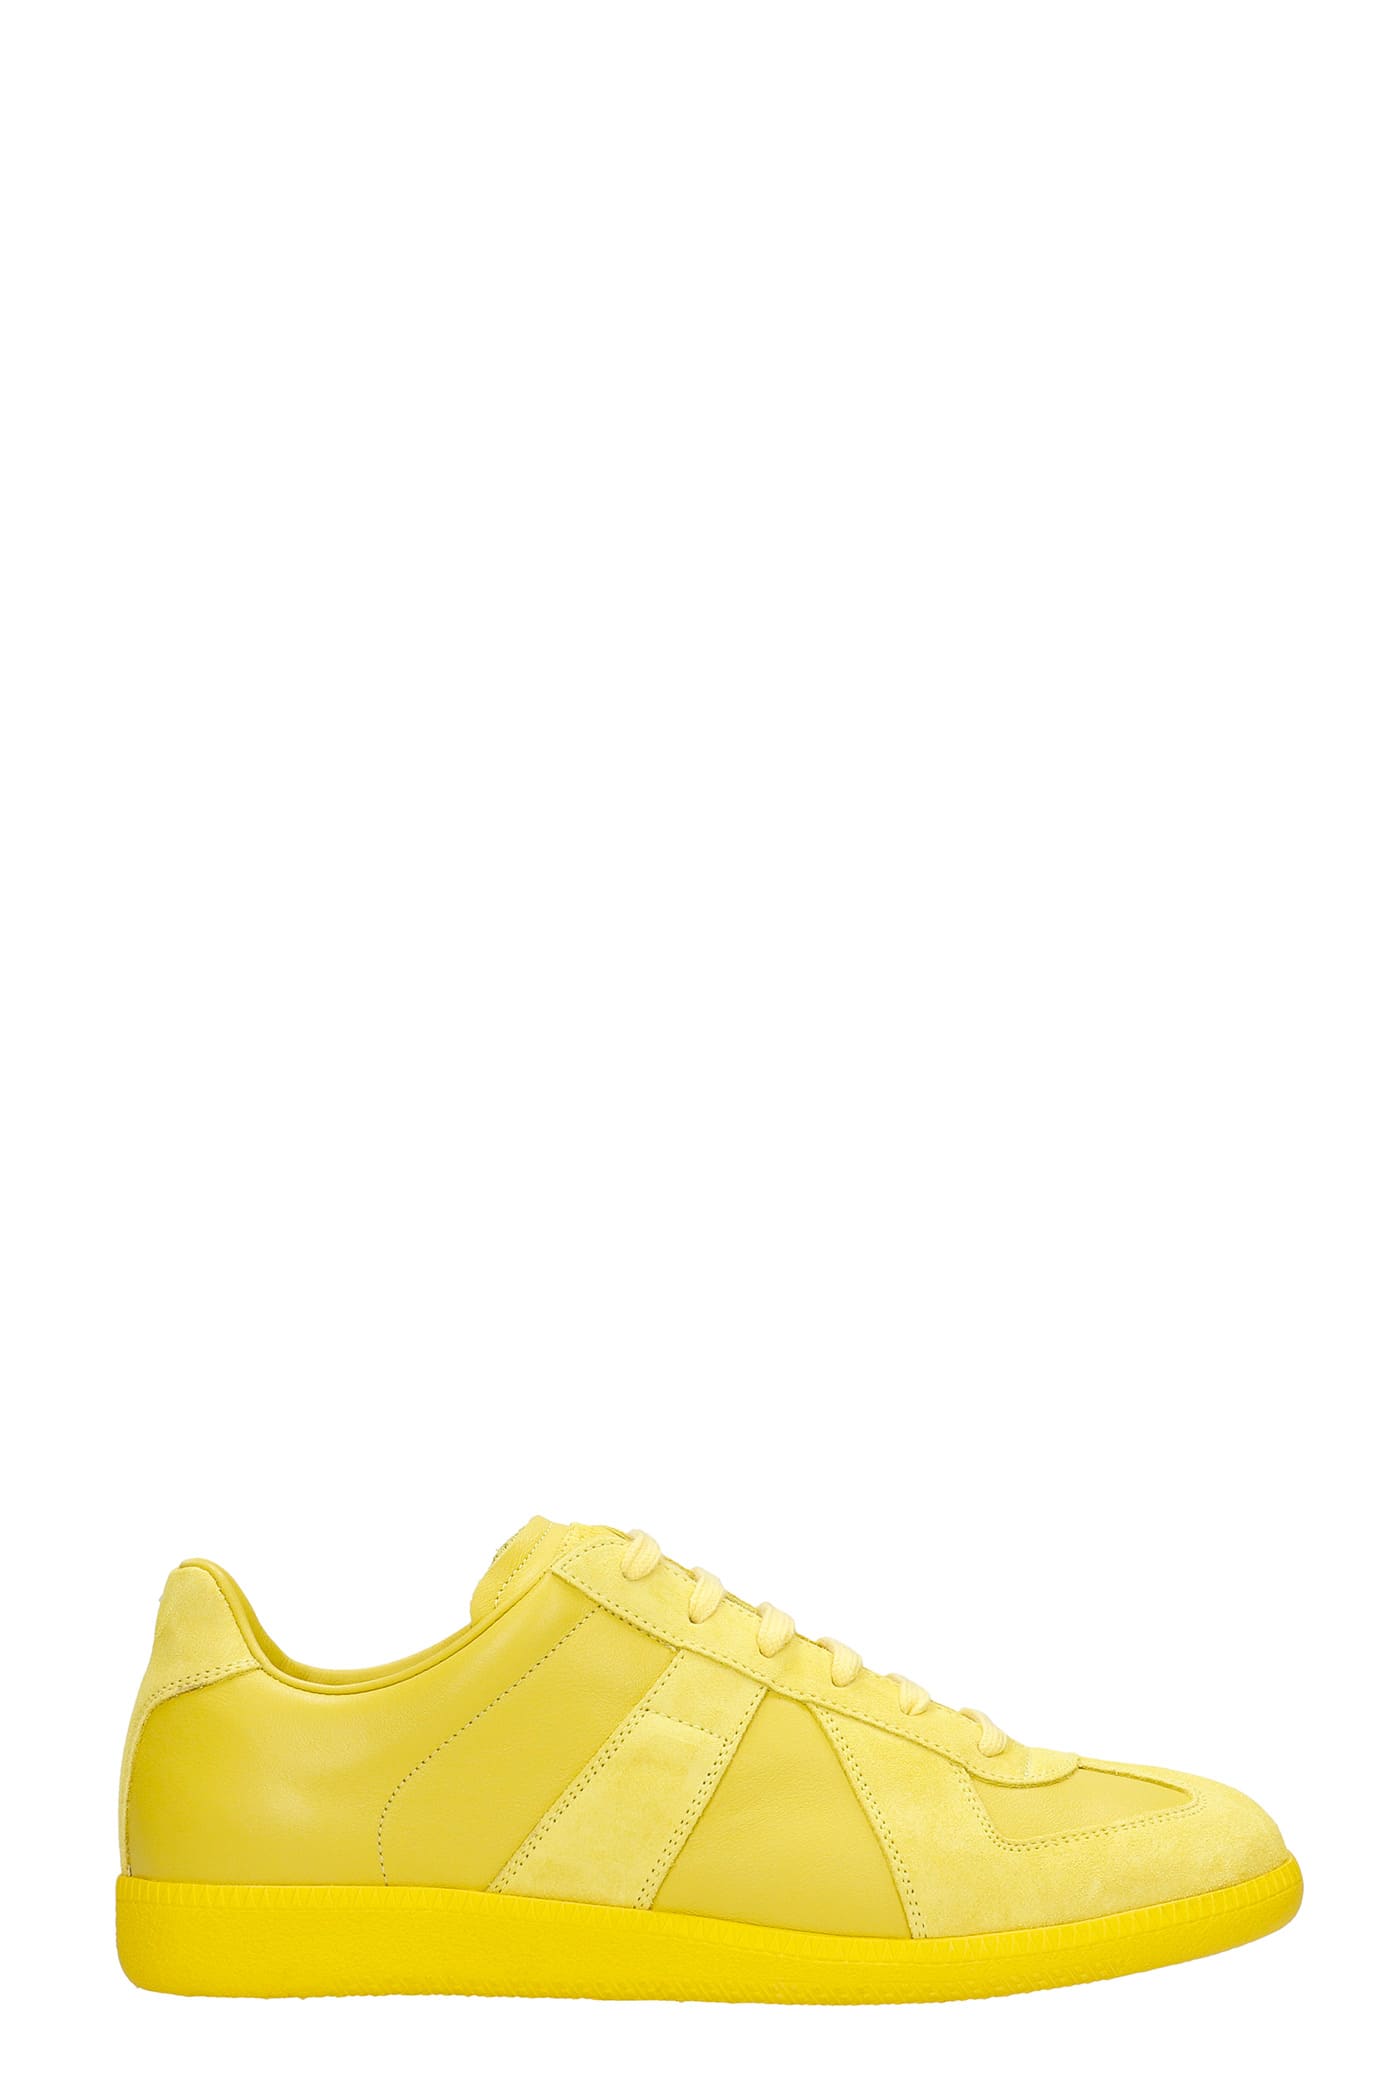 MAISON MARGIELA REPLICA SNEAKERS IN YELLOW SUEDE AND LEATHER,S57WS0236P1897H8677